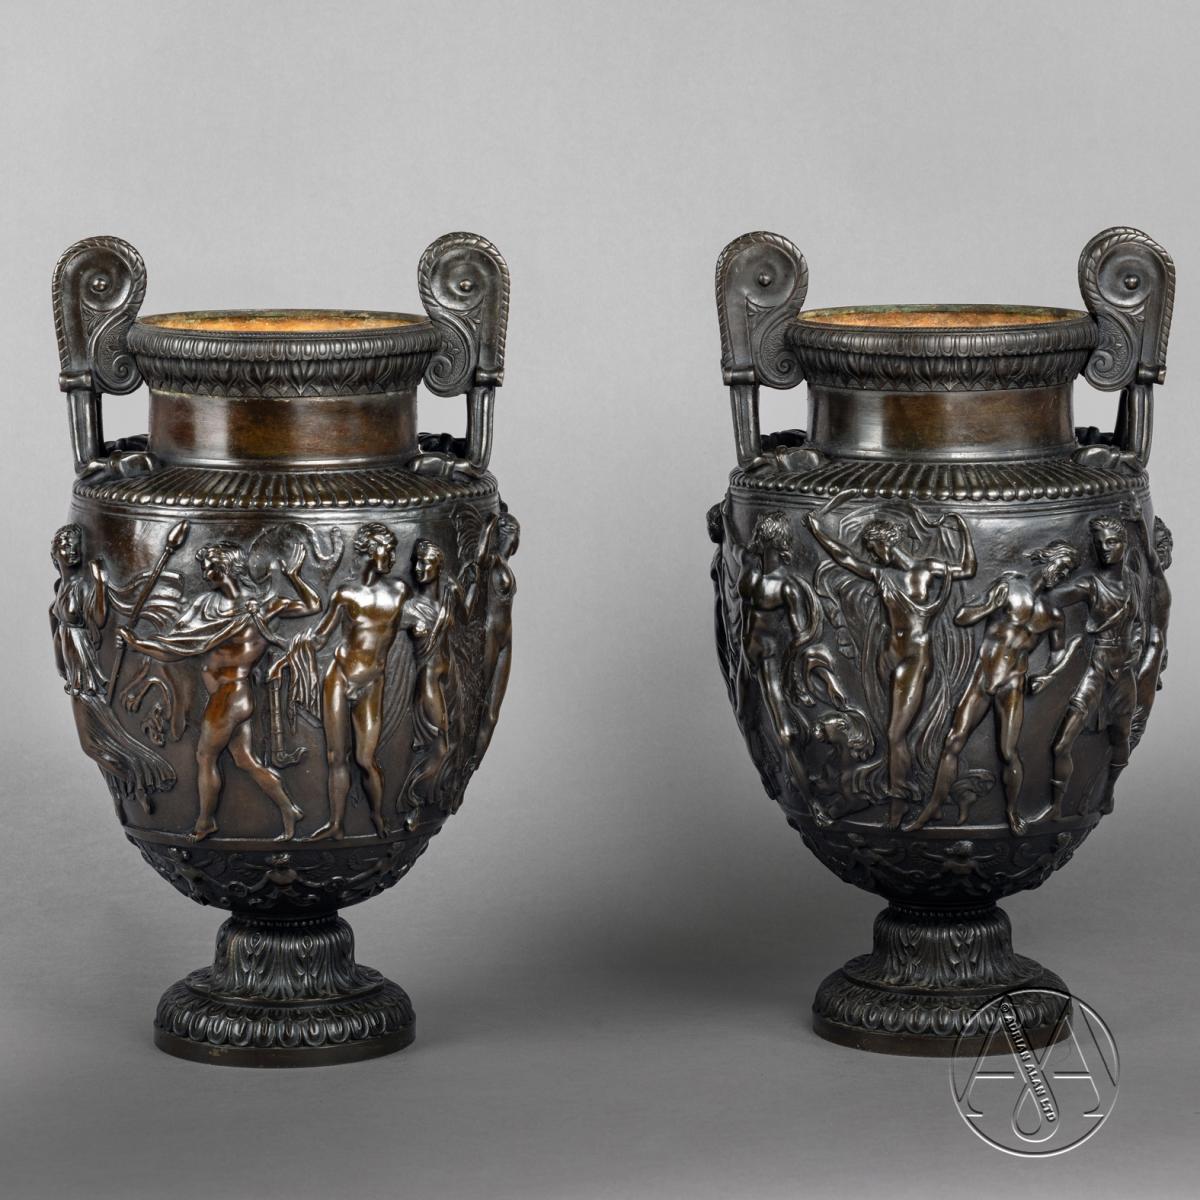 A Pair of Patinated Bronze Models of the Townley Vase by Auguste-Maximilien Delafontaine